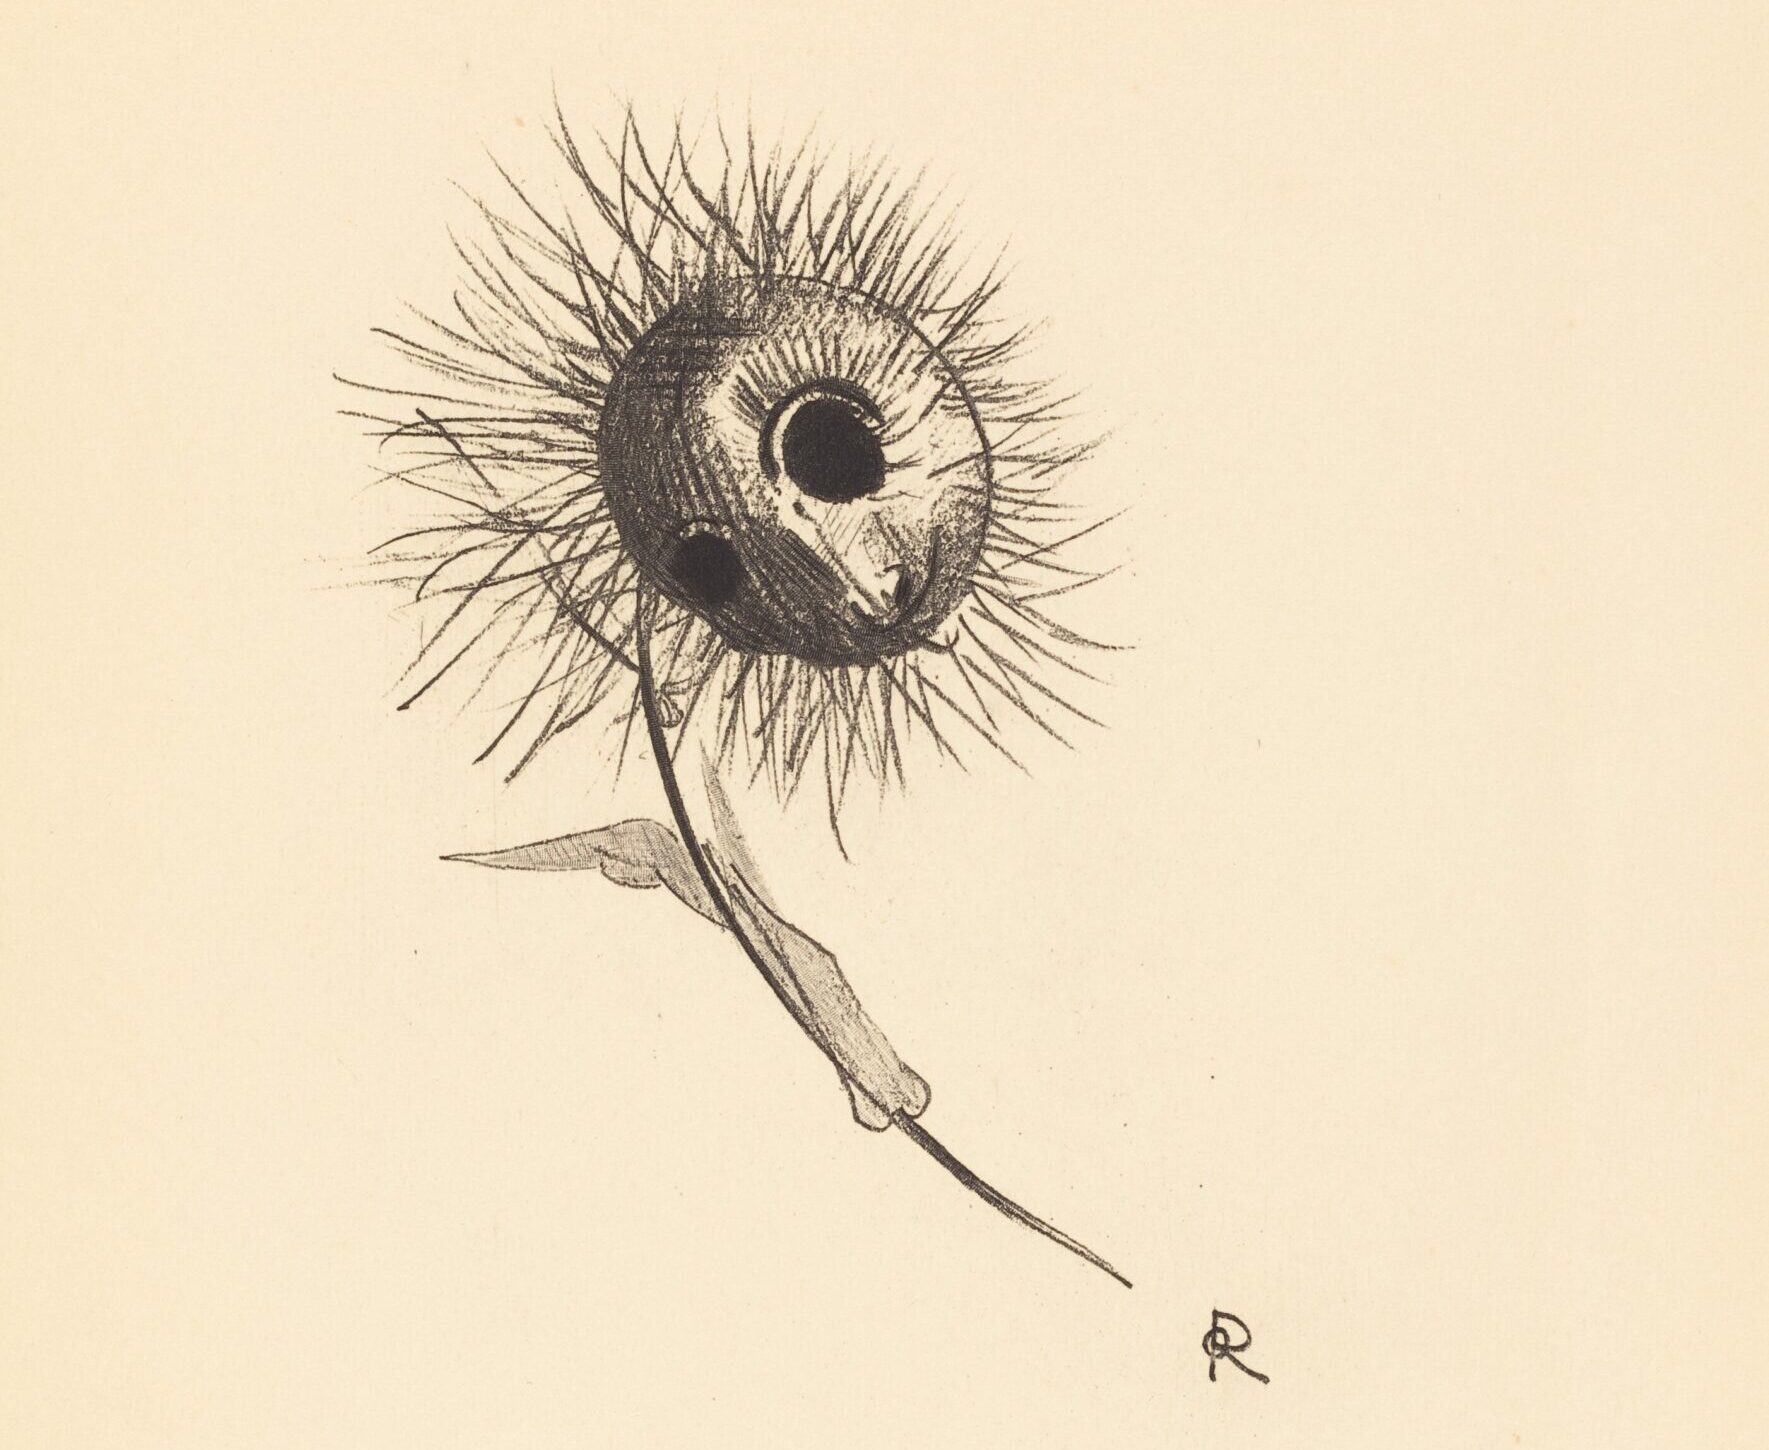 Lithograph of dandelion-like flower with a face and empty eye sockets